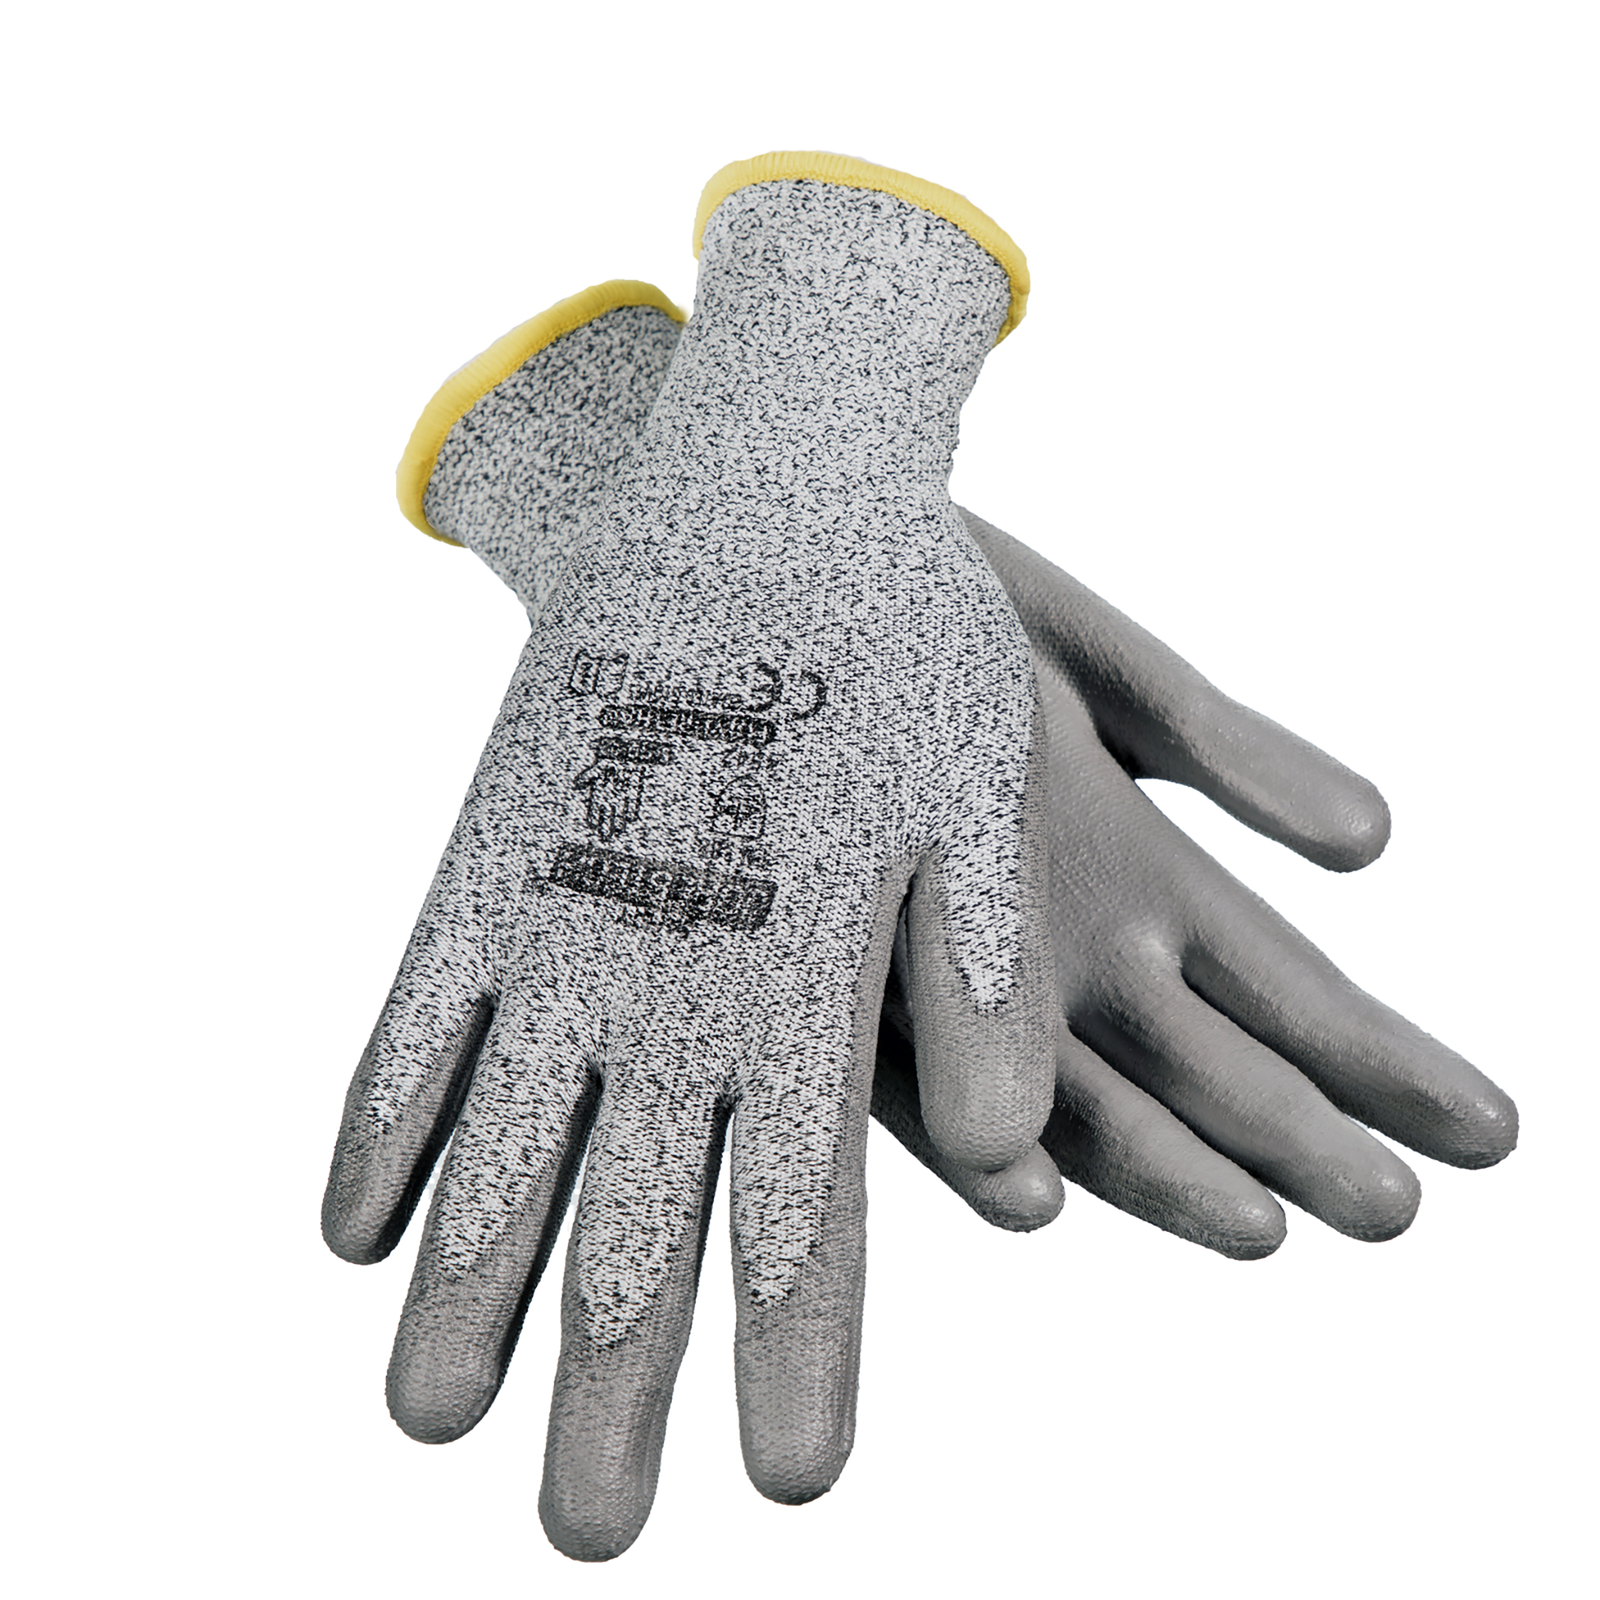 One pair of cut resistant JORESTECH gray safety work gloves with polyurethane dipped palm